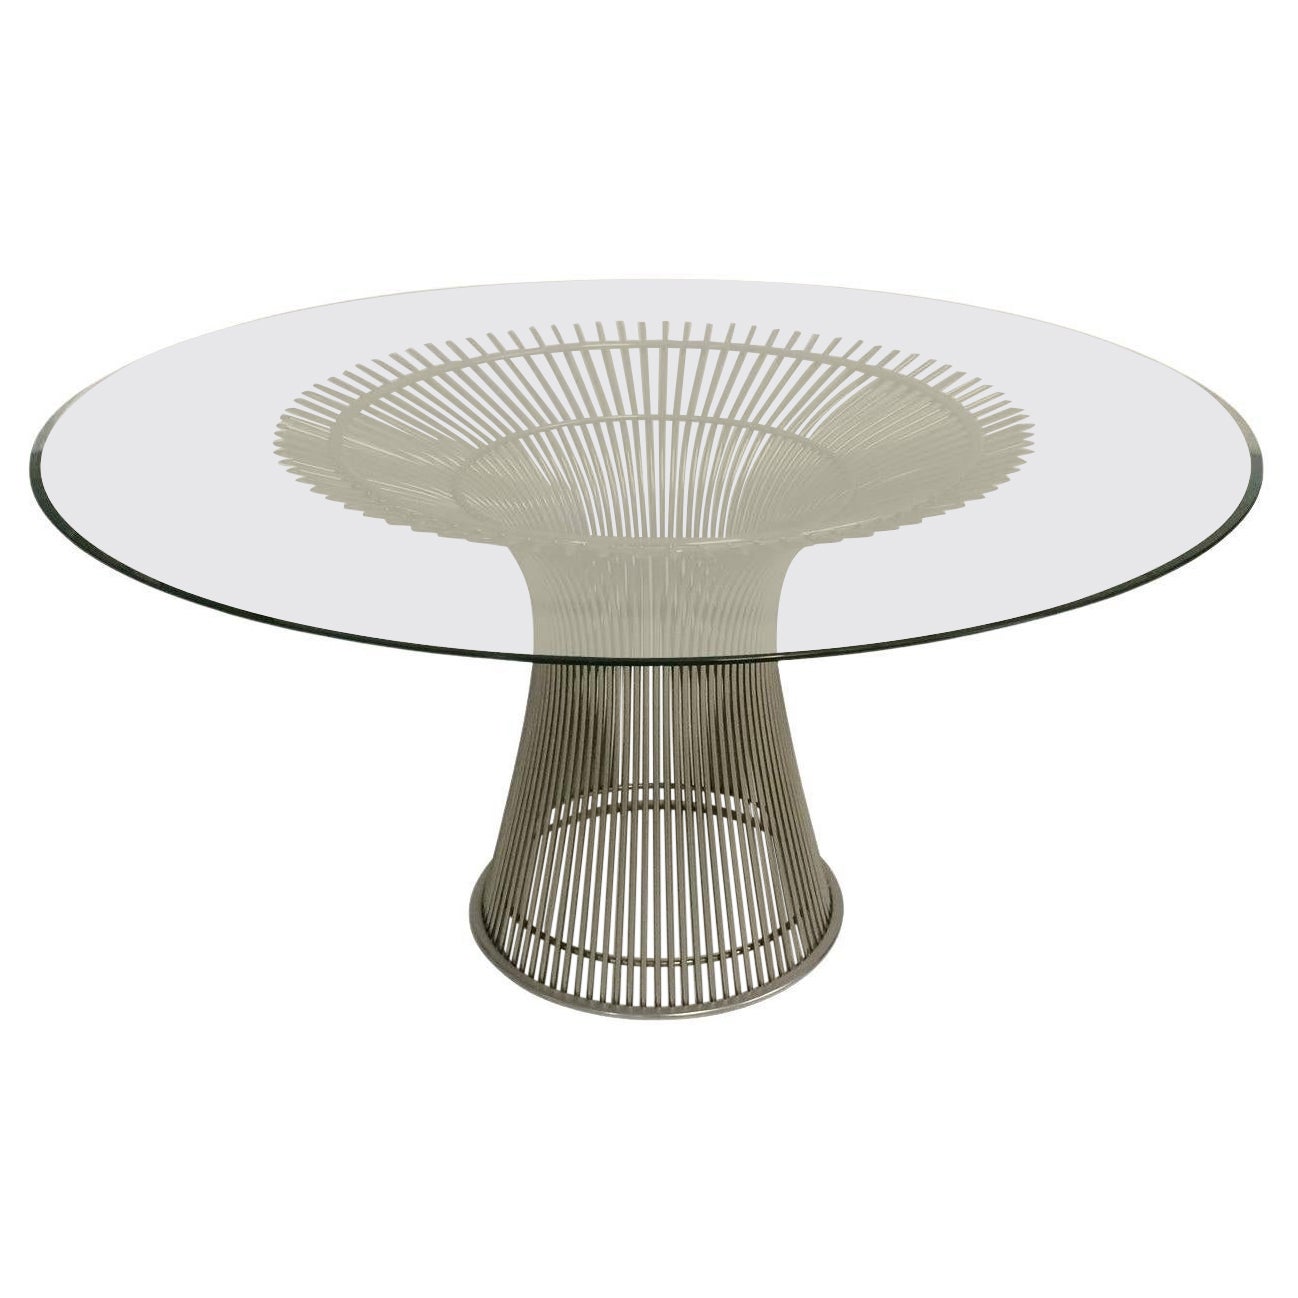 Warren Platner Steel and Glass Dining Table for Knoll